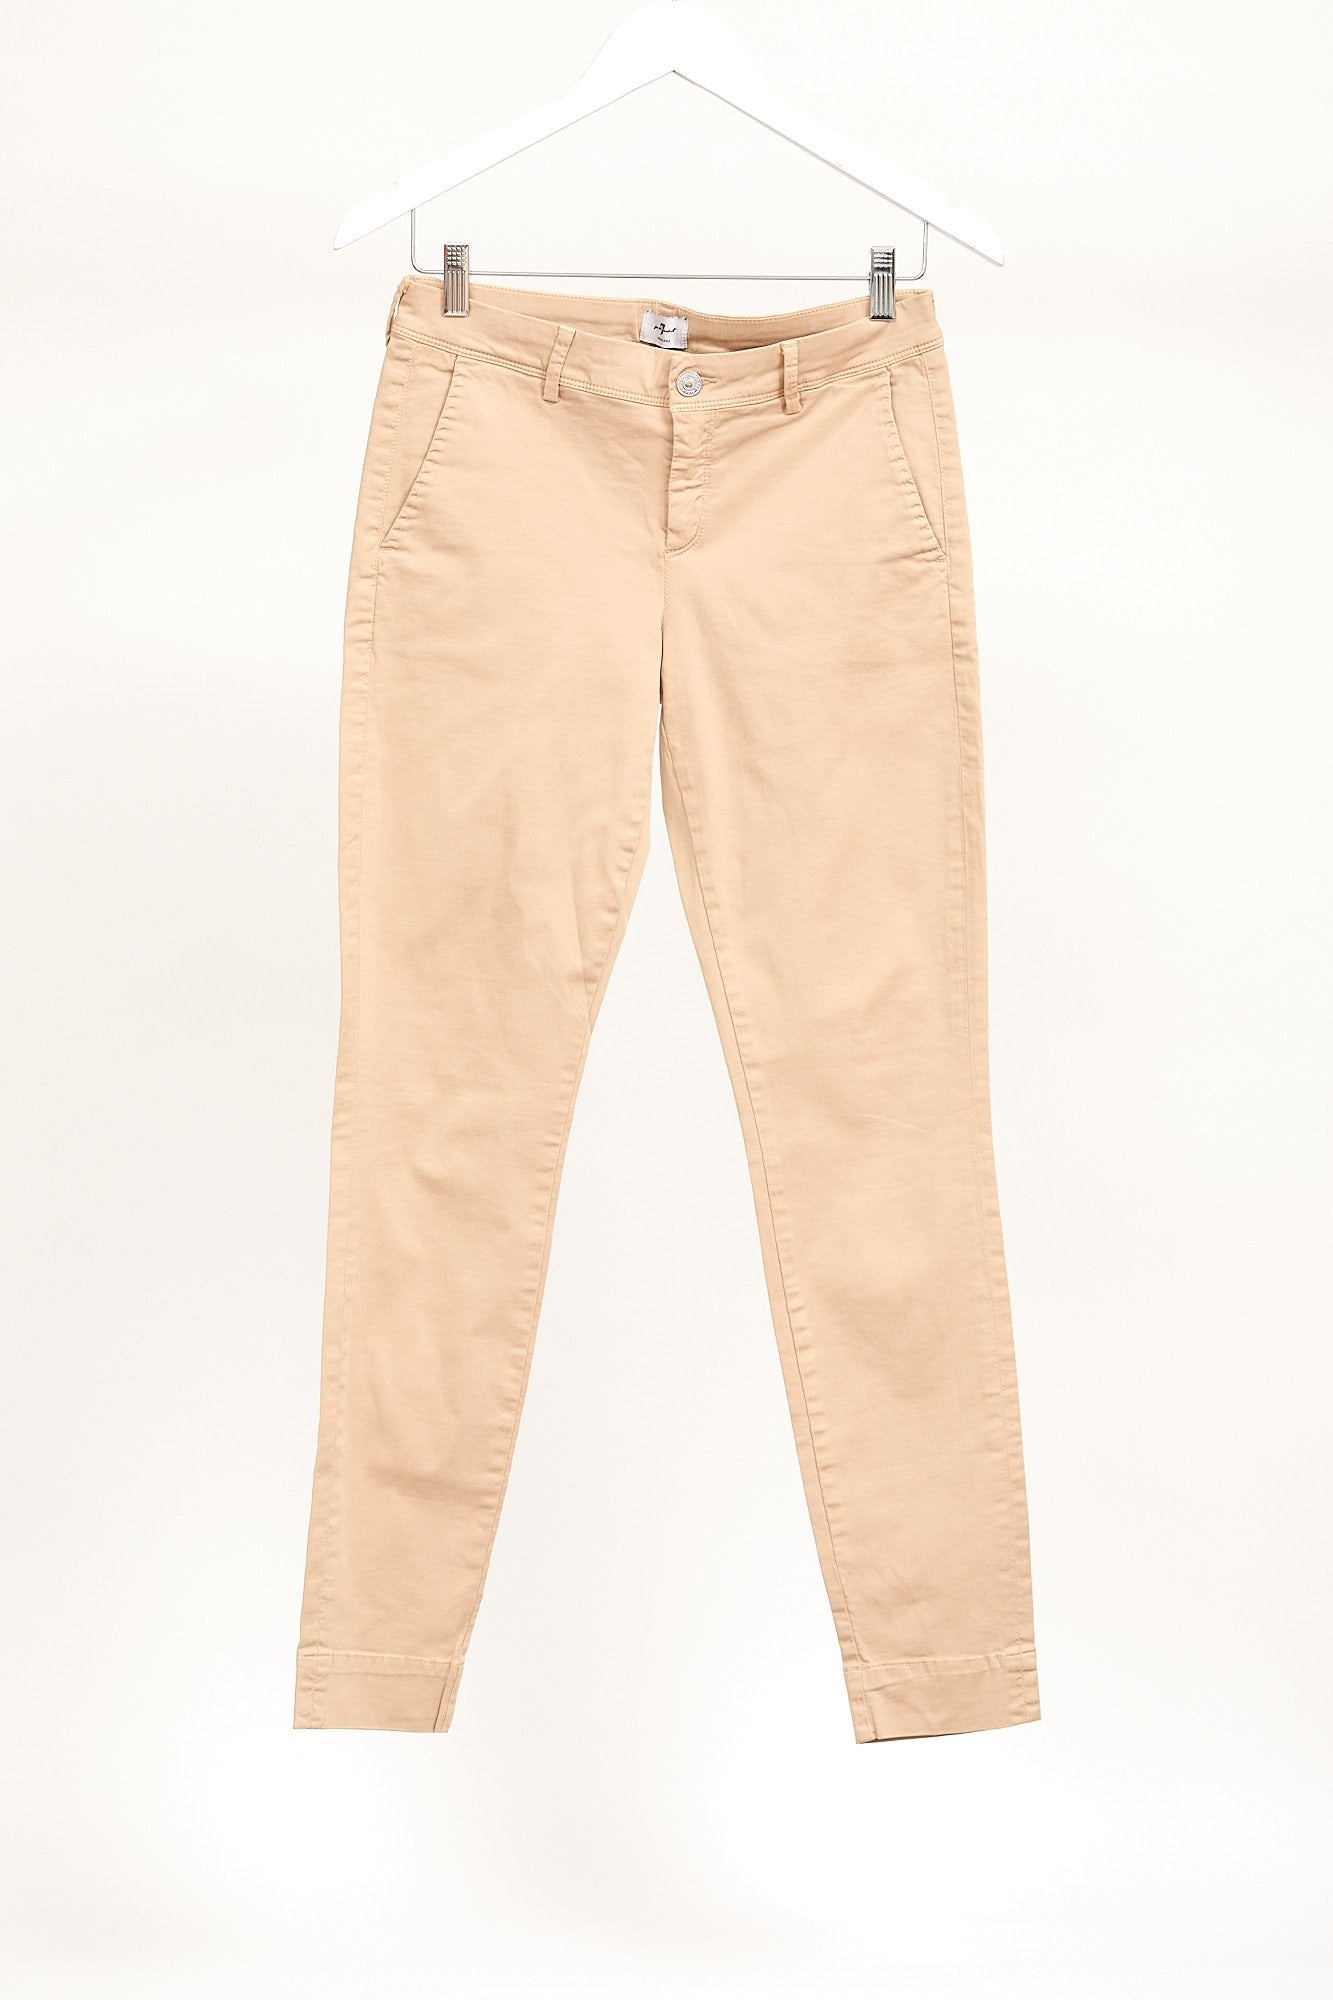 Womens 7 for All Mankind Beige Trousers: Size 8 or Small